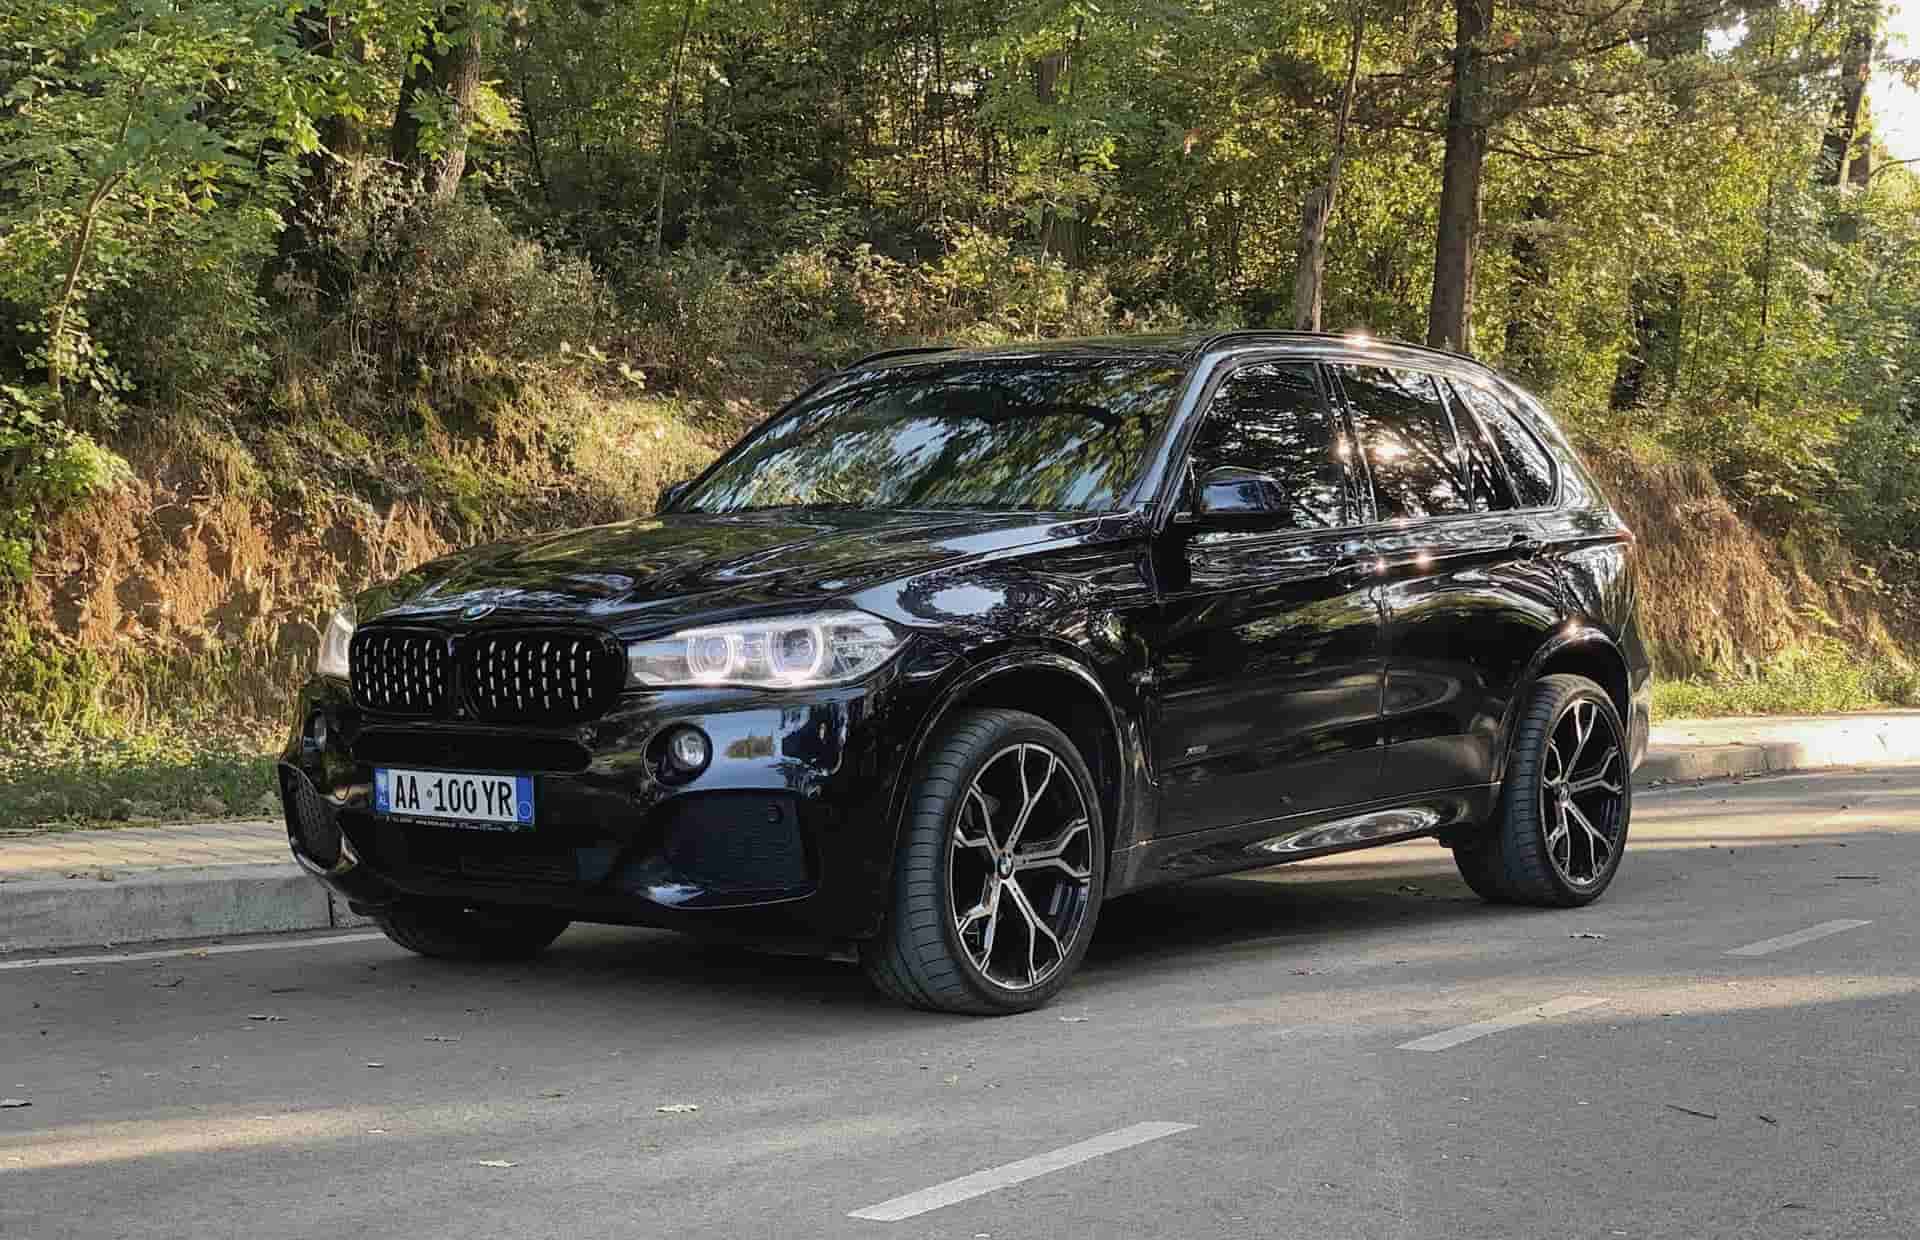 BMW X5 with 20 inch tires